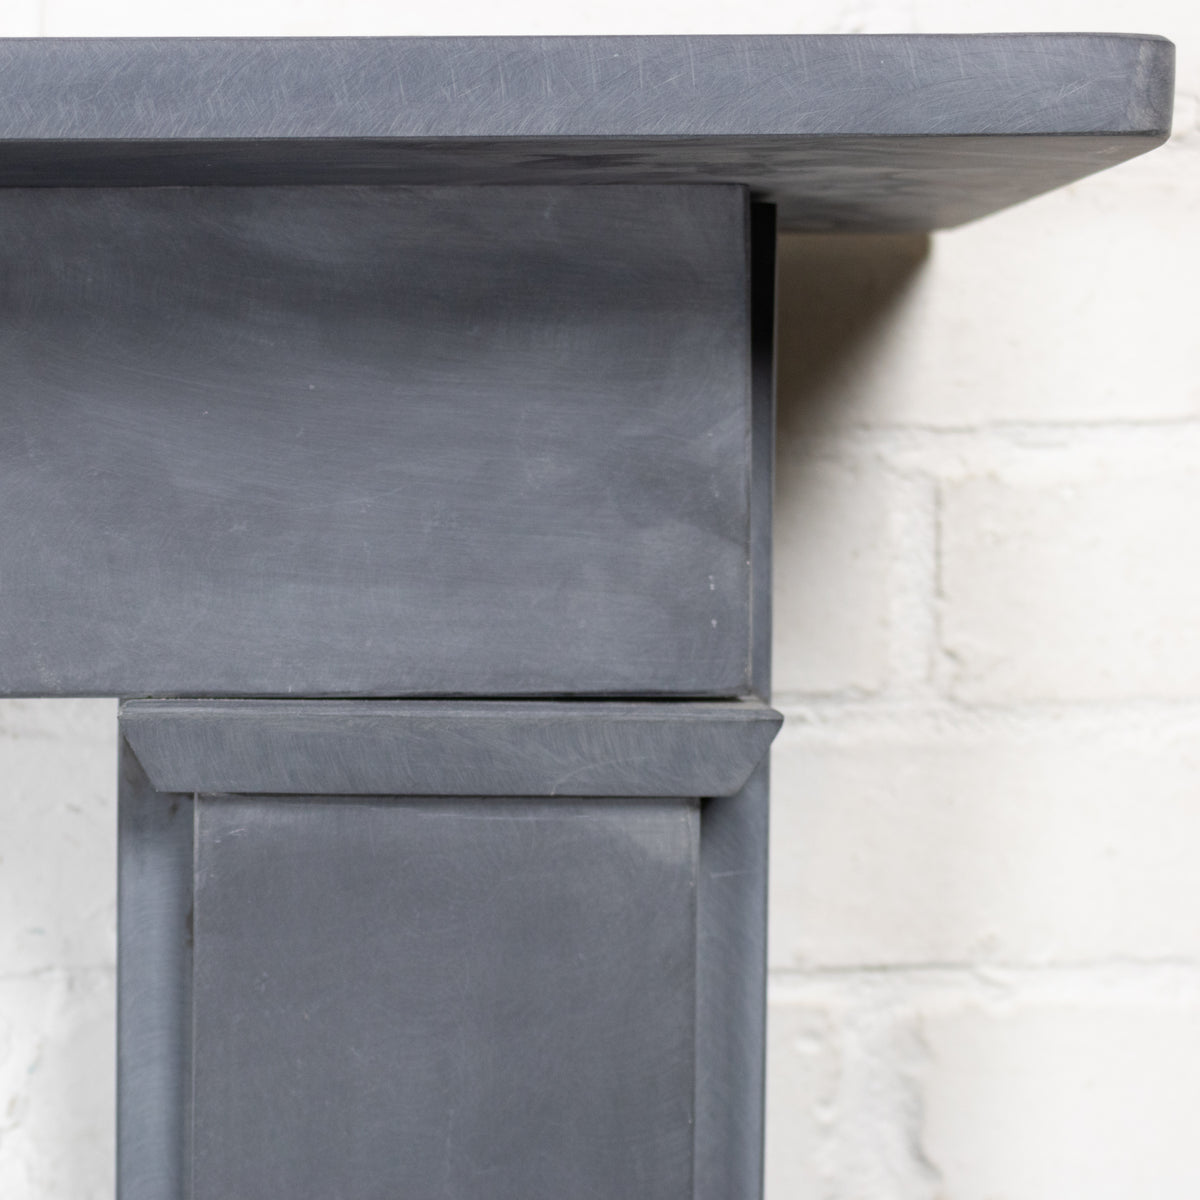 Late Georgian/Victorian Style Natural Slate Chimneypiece | The Architectural Forum